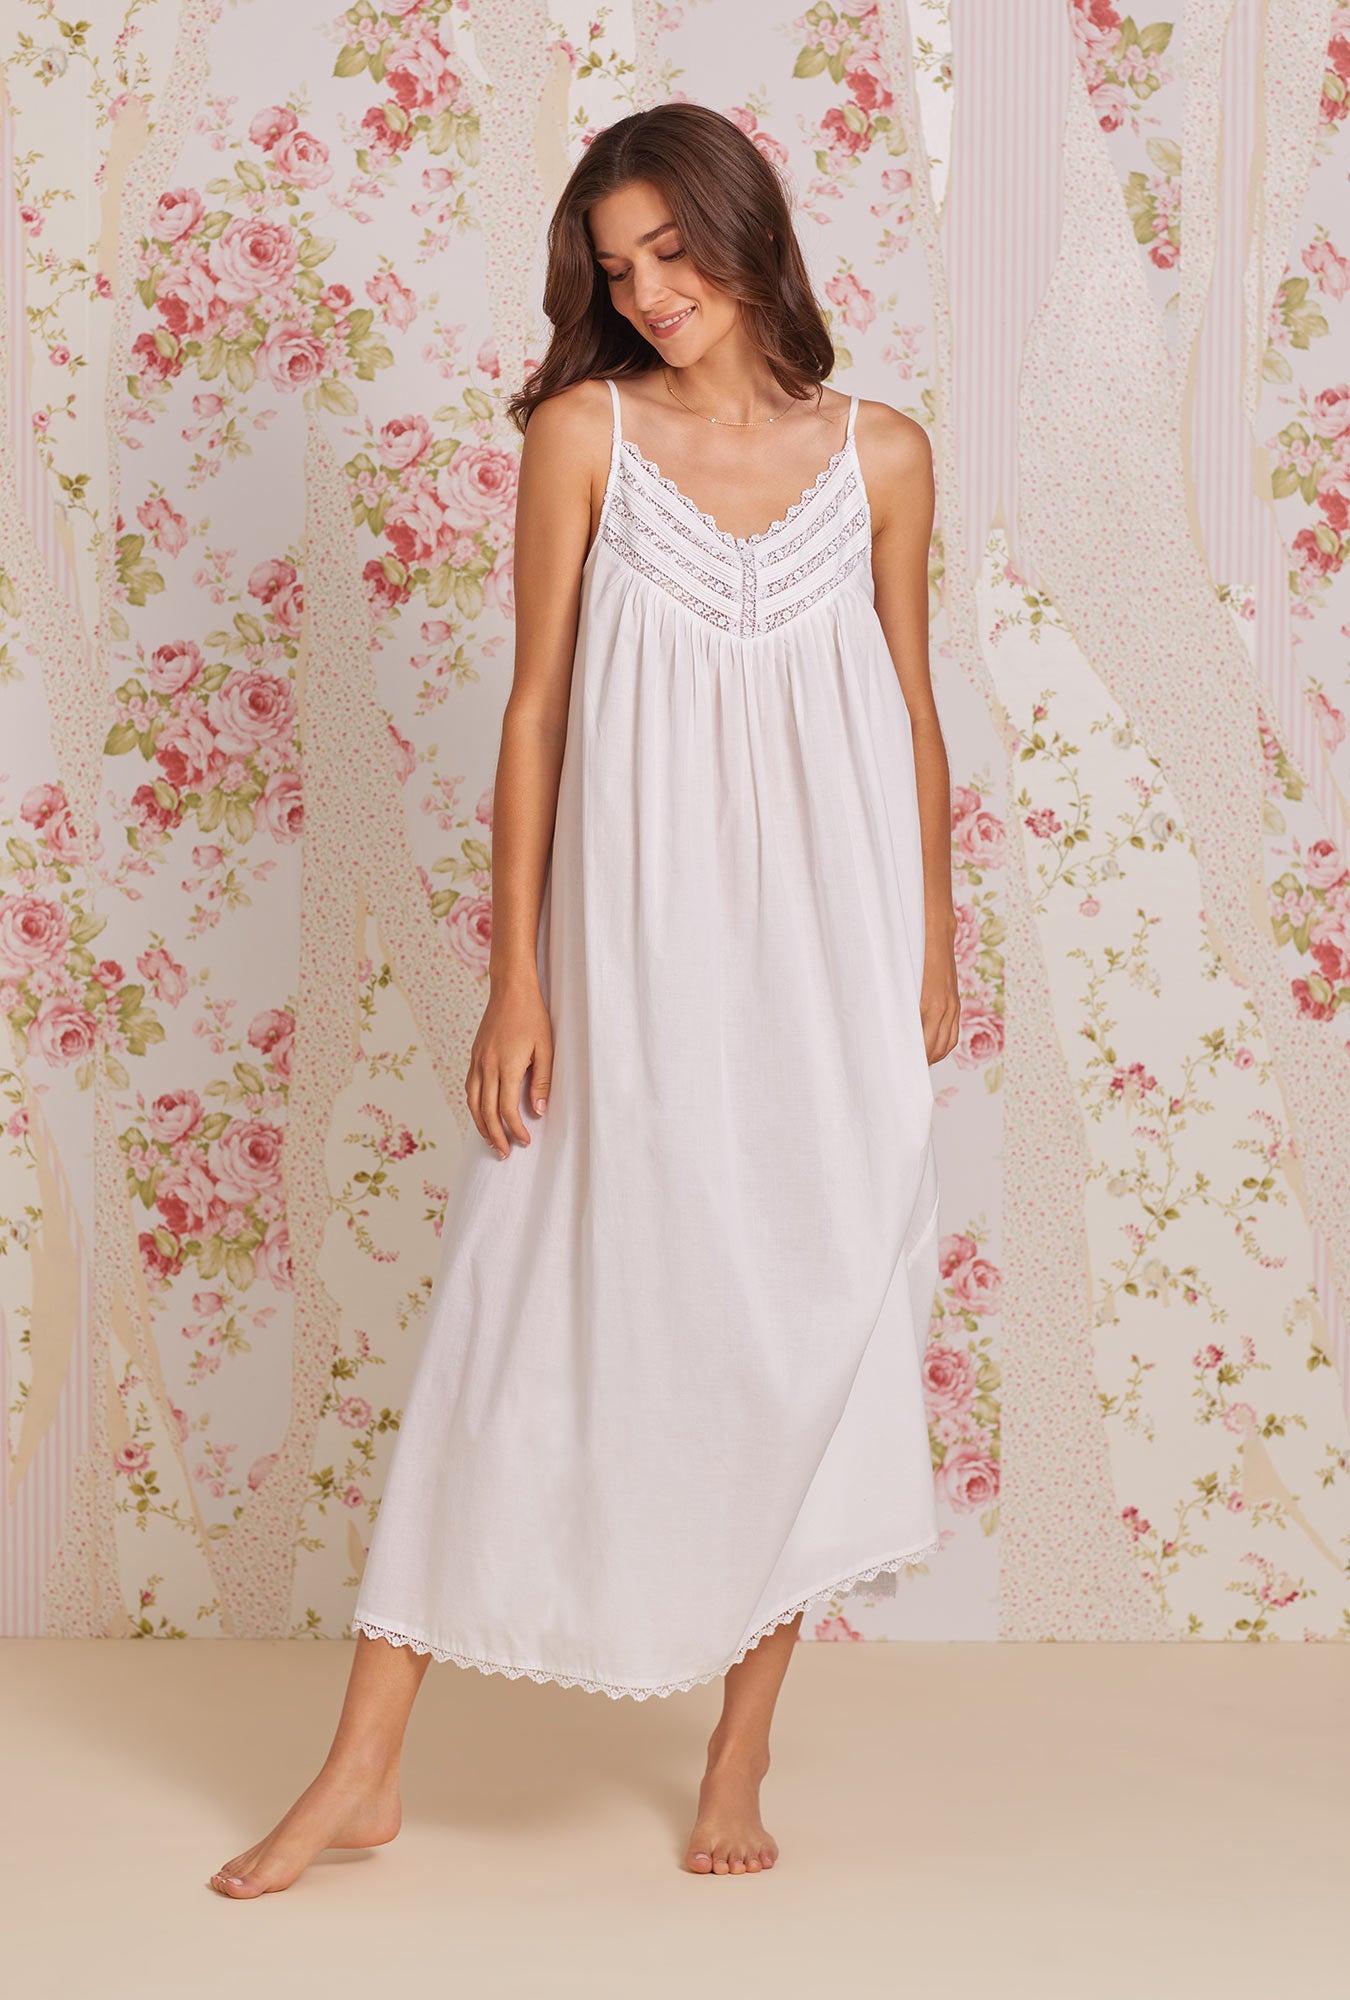 A lady wearing Cottage Dreams Nightgown